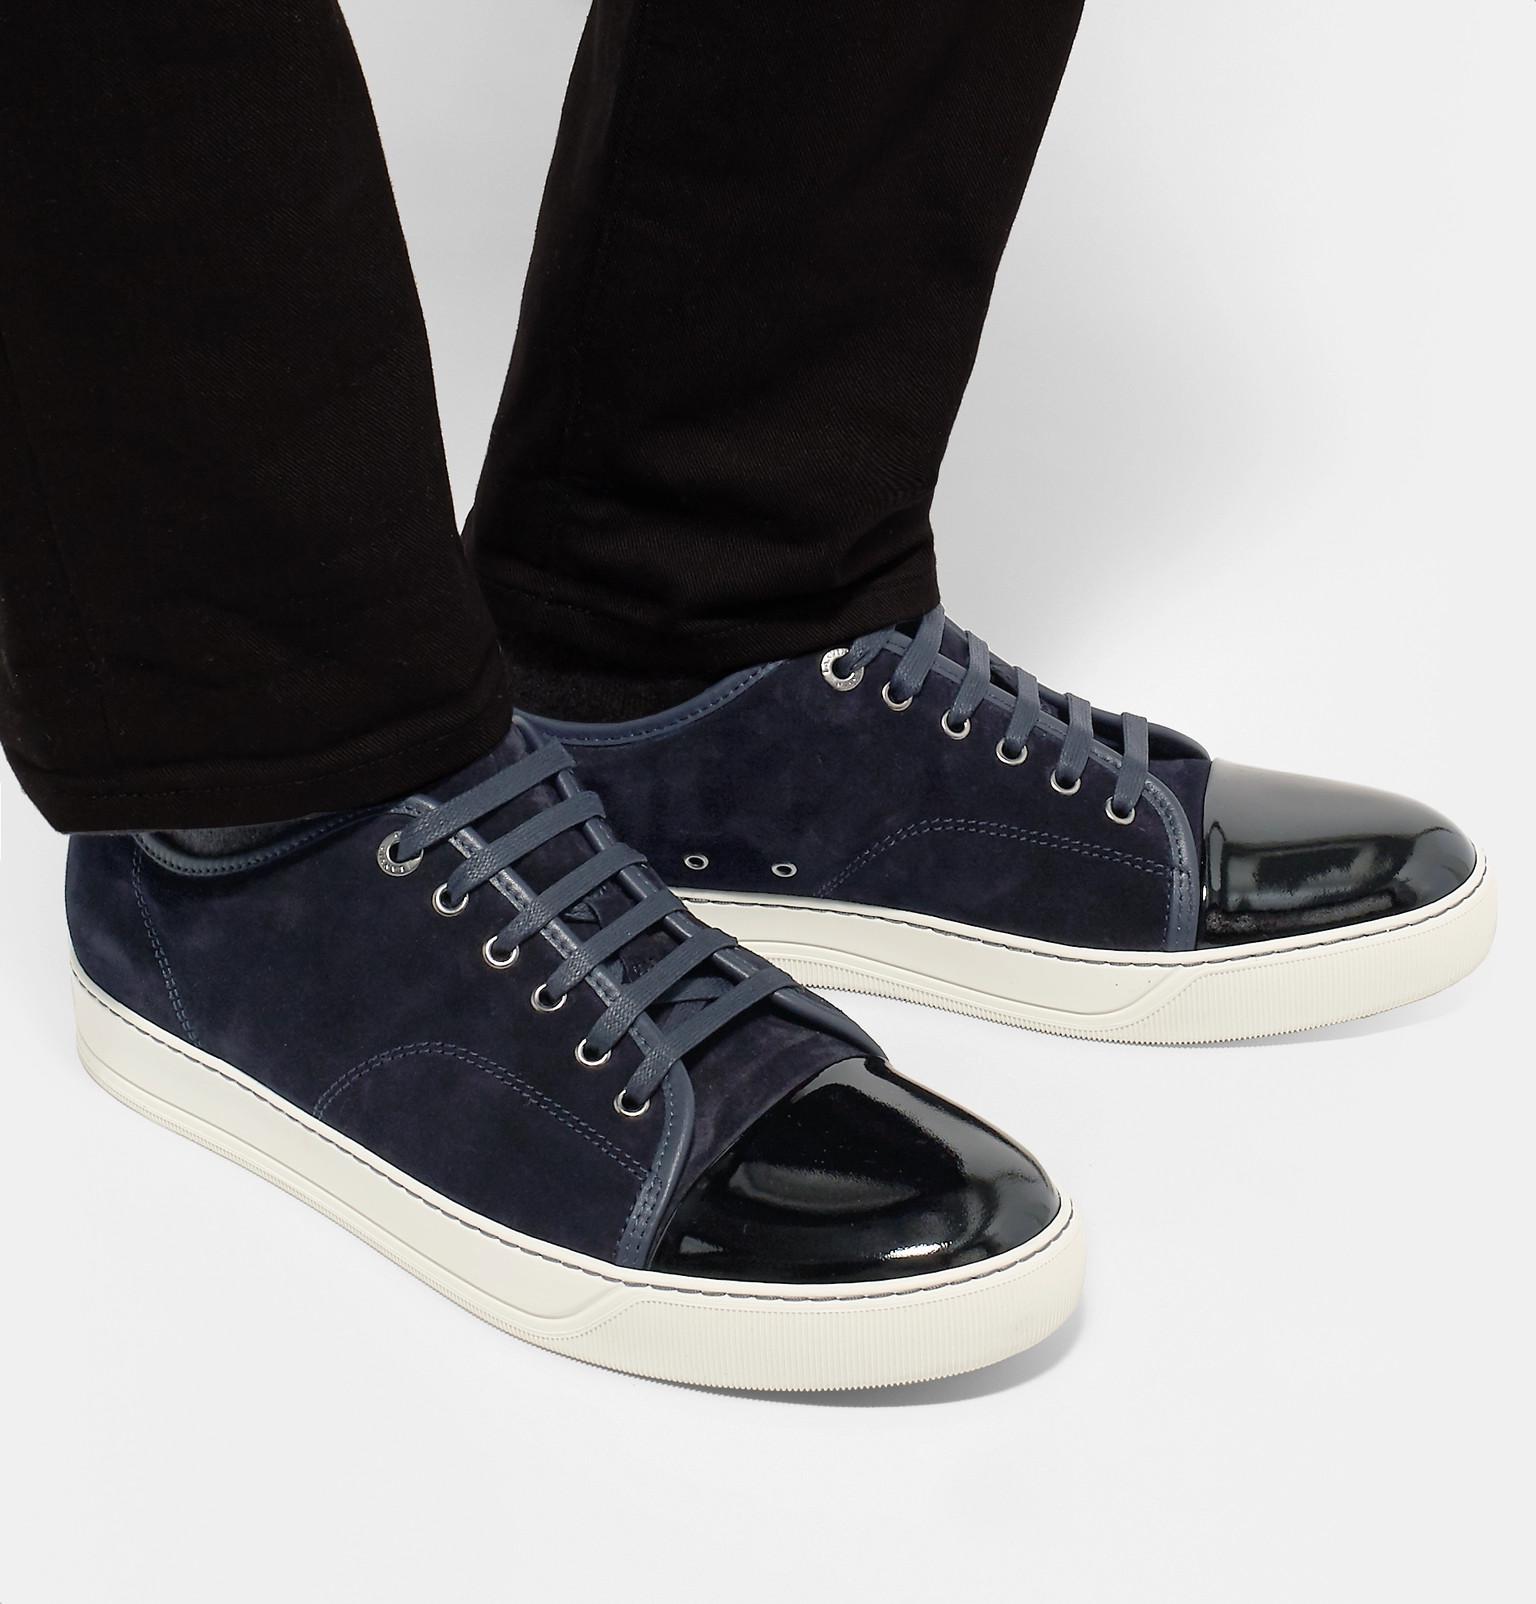 Lanvin Cap-toe Suede And Patent-leather Sneakers in Midnight Blue (Blue)  for Men - Lyst